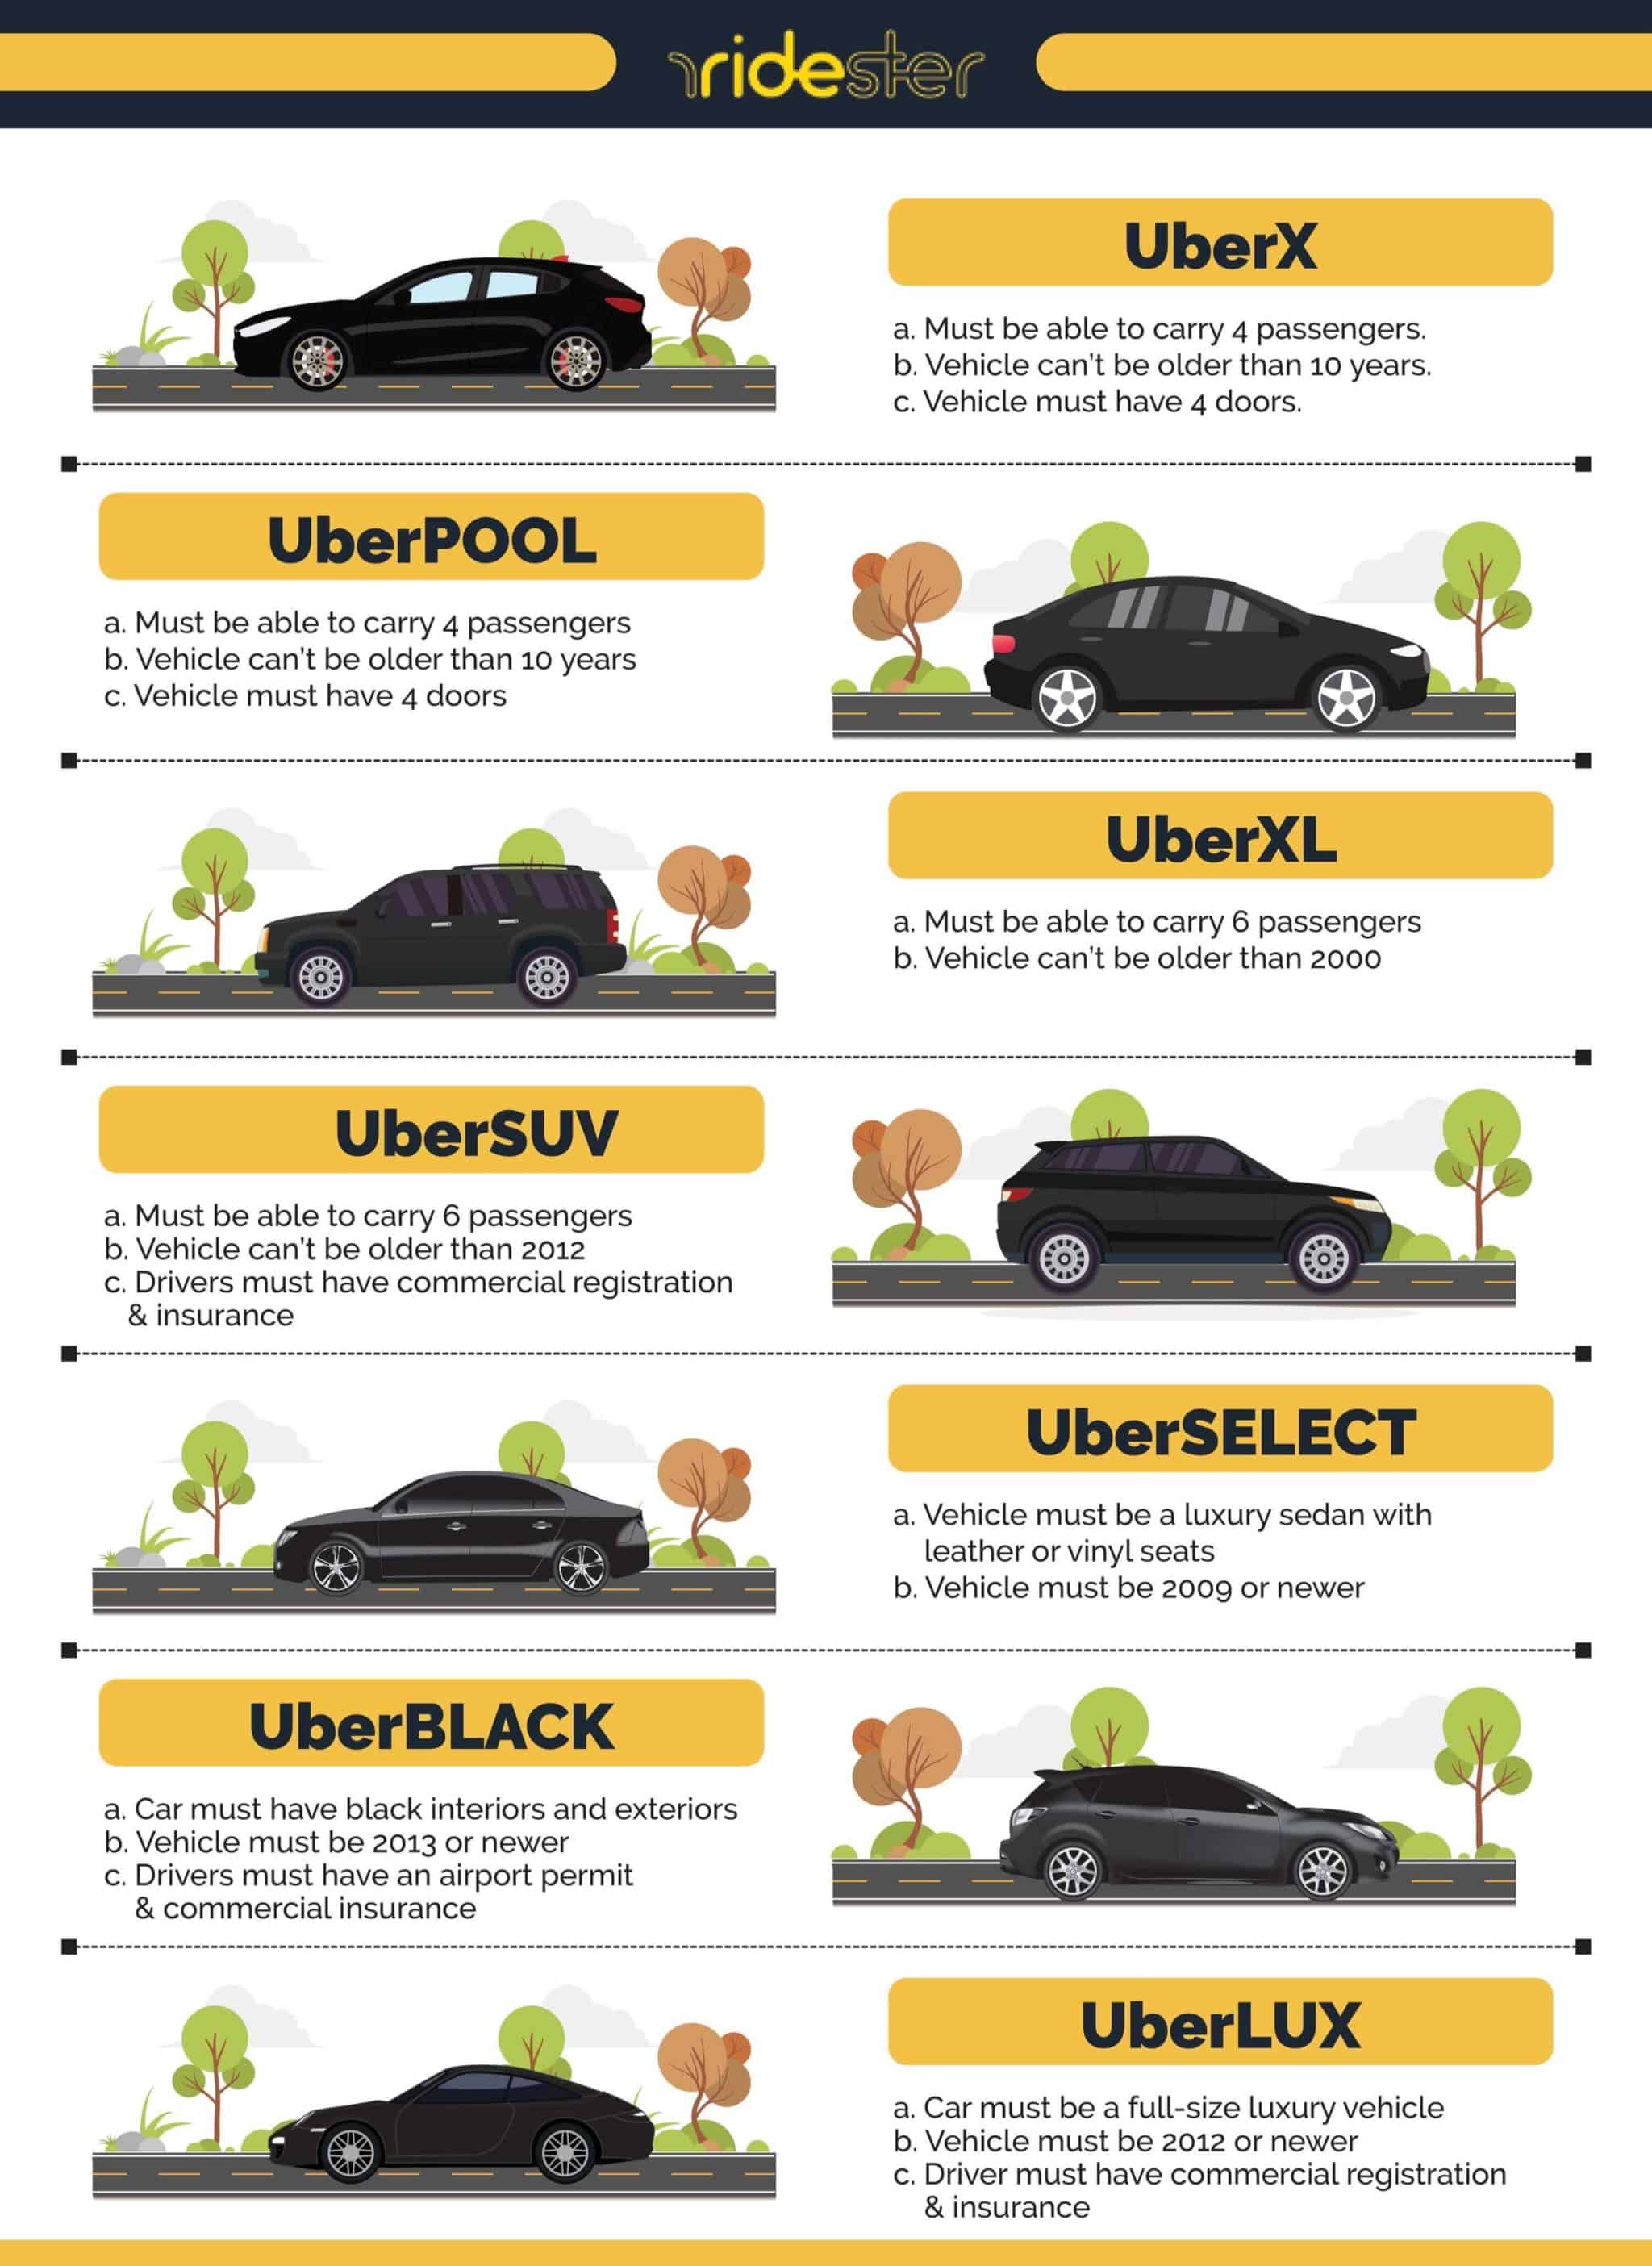 uber cars: your guide to the various types of uber cars - ridester